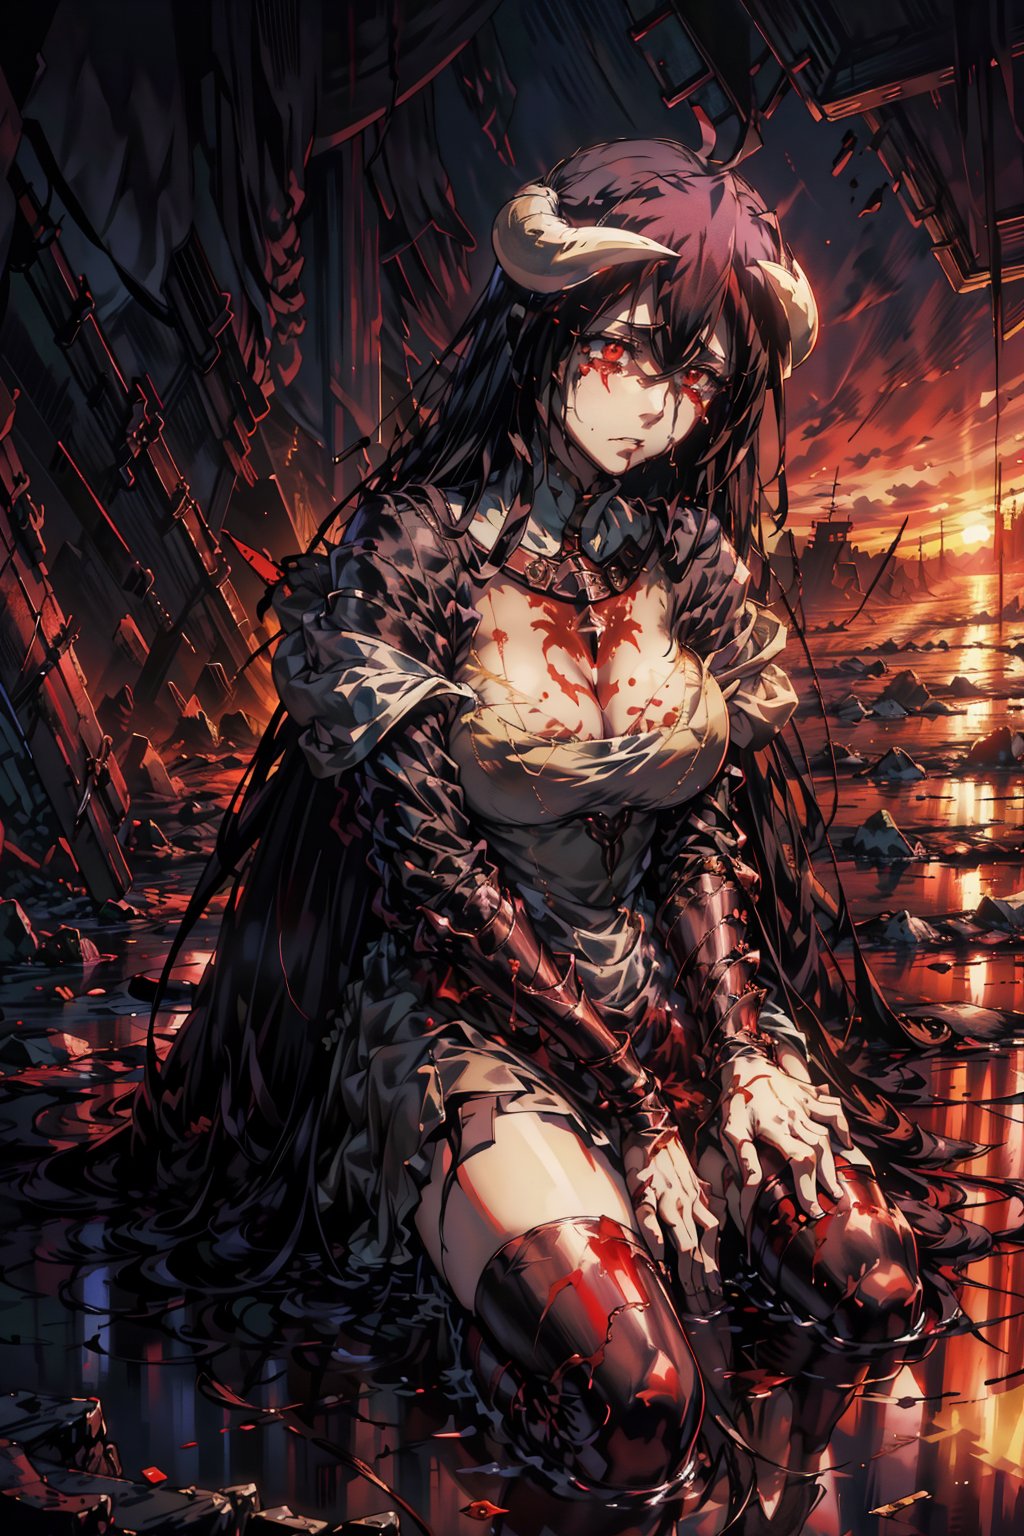 Albedo's anguished face, tears mixing with the blood stains on her dress, as the warm crimson hues of sunset illuminate the desolate battlefield. Contrasting with the internal turmoil. The stillness conveys hope and comfort in the midst of destruction, Hestia's desperate expression a poignant counterpoint to the serene backdrop.,albedo